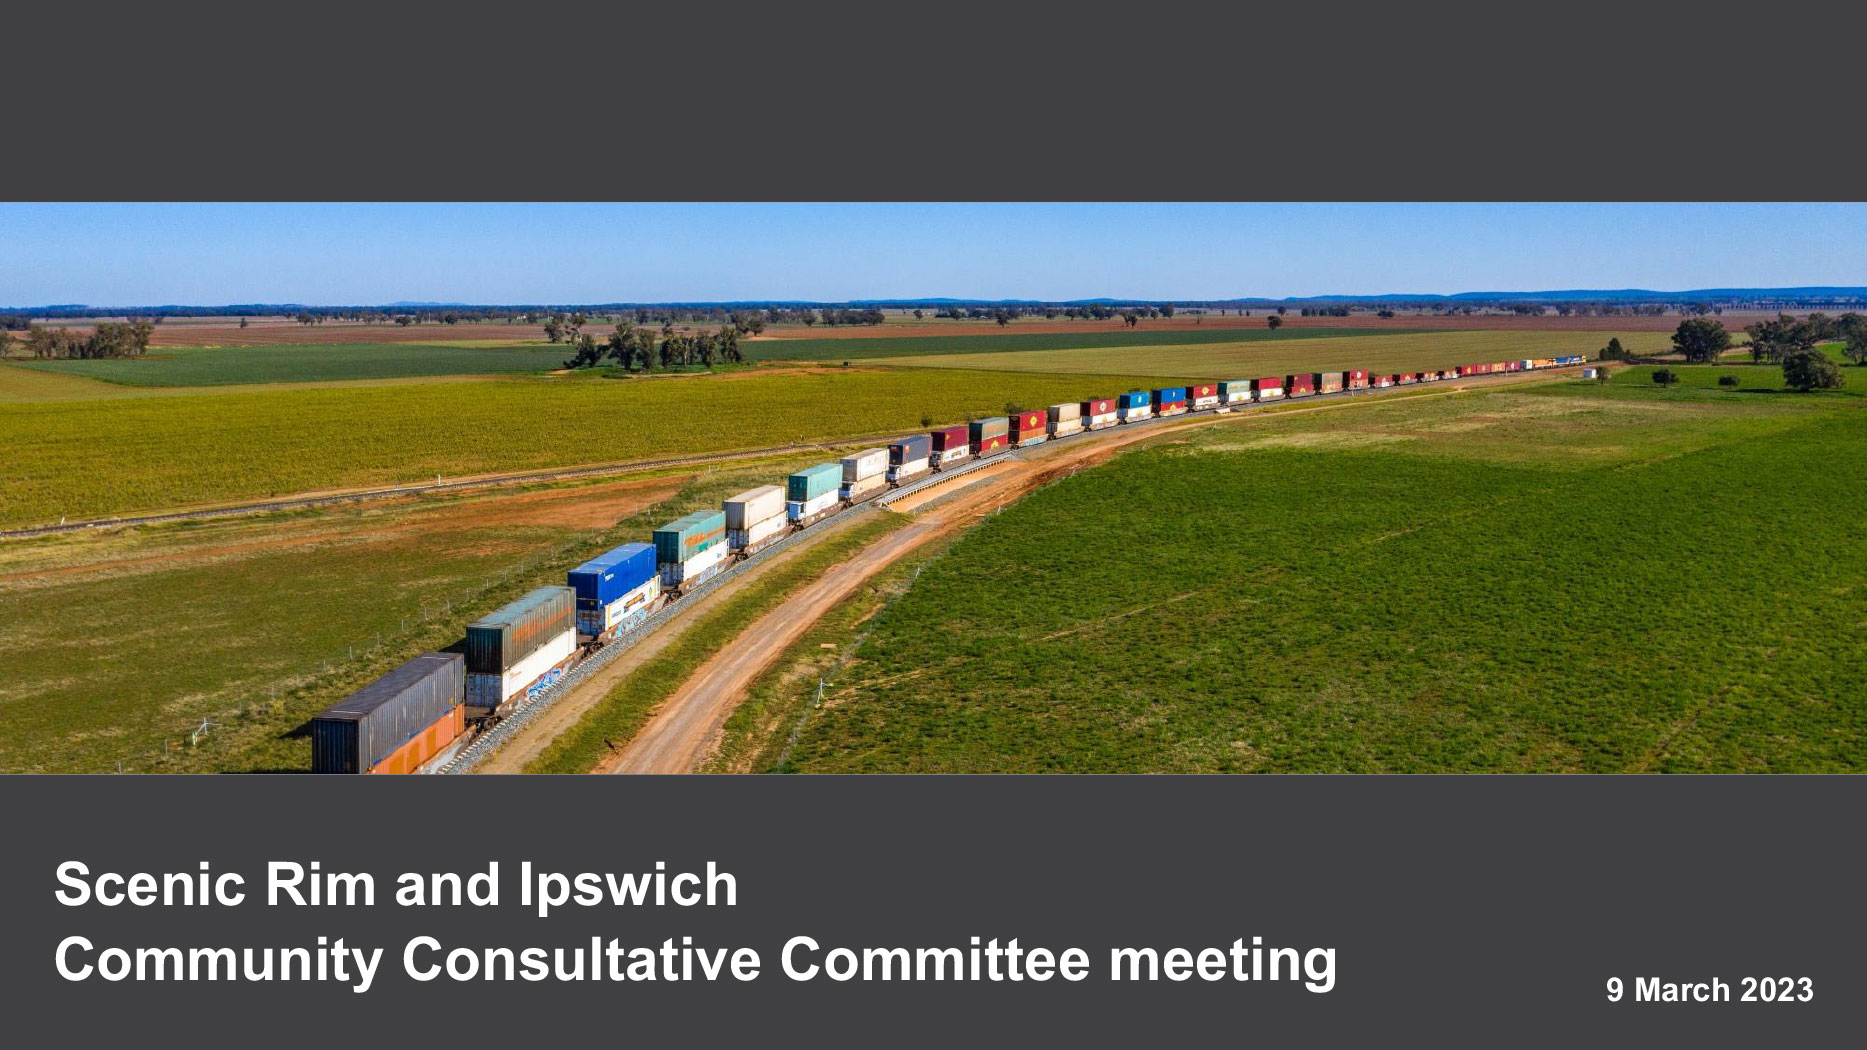 Image thumbnail for Scenic Rim and Ipswich CCC meeting presentation - 9 March 2023